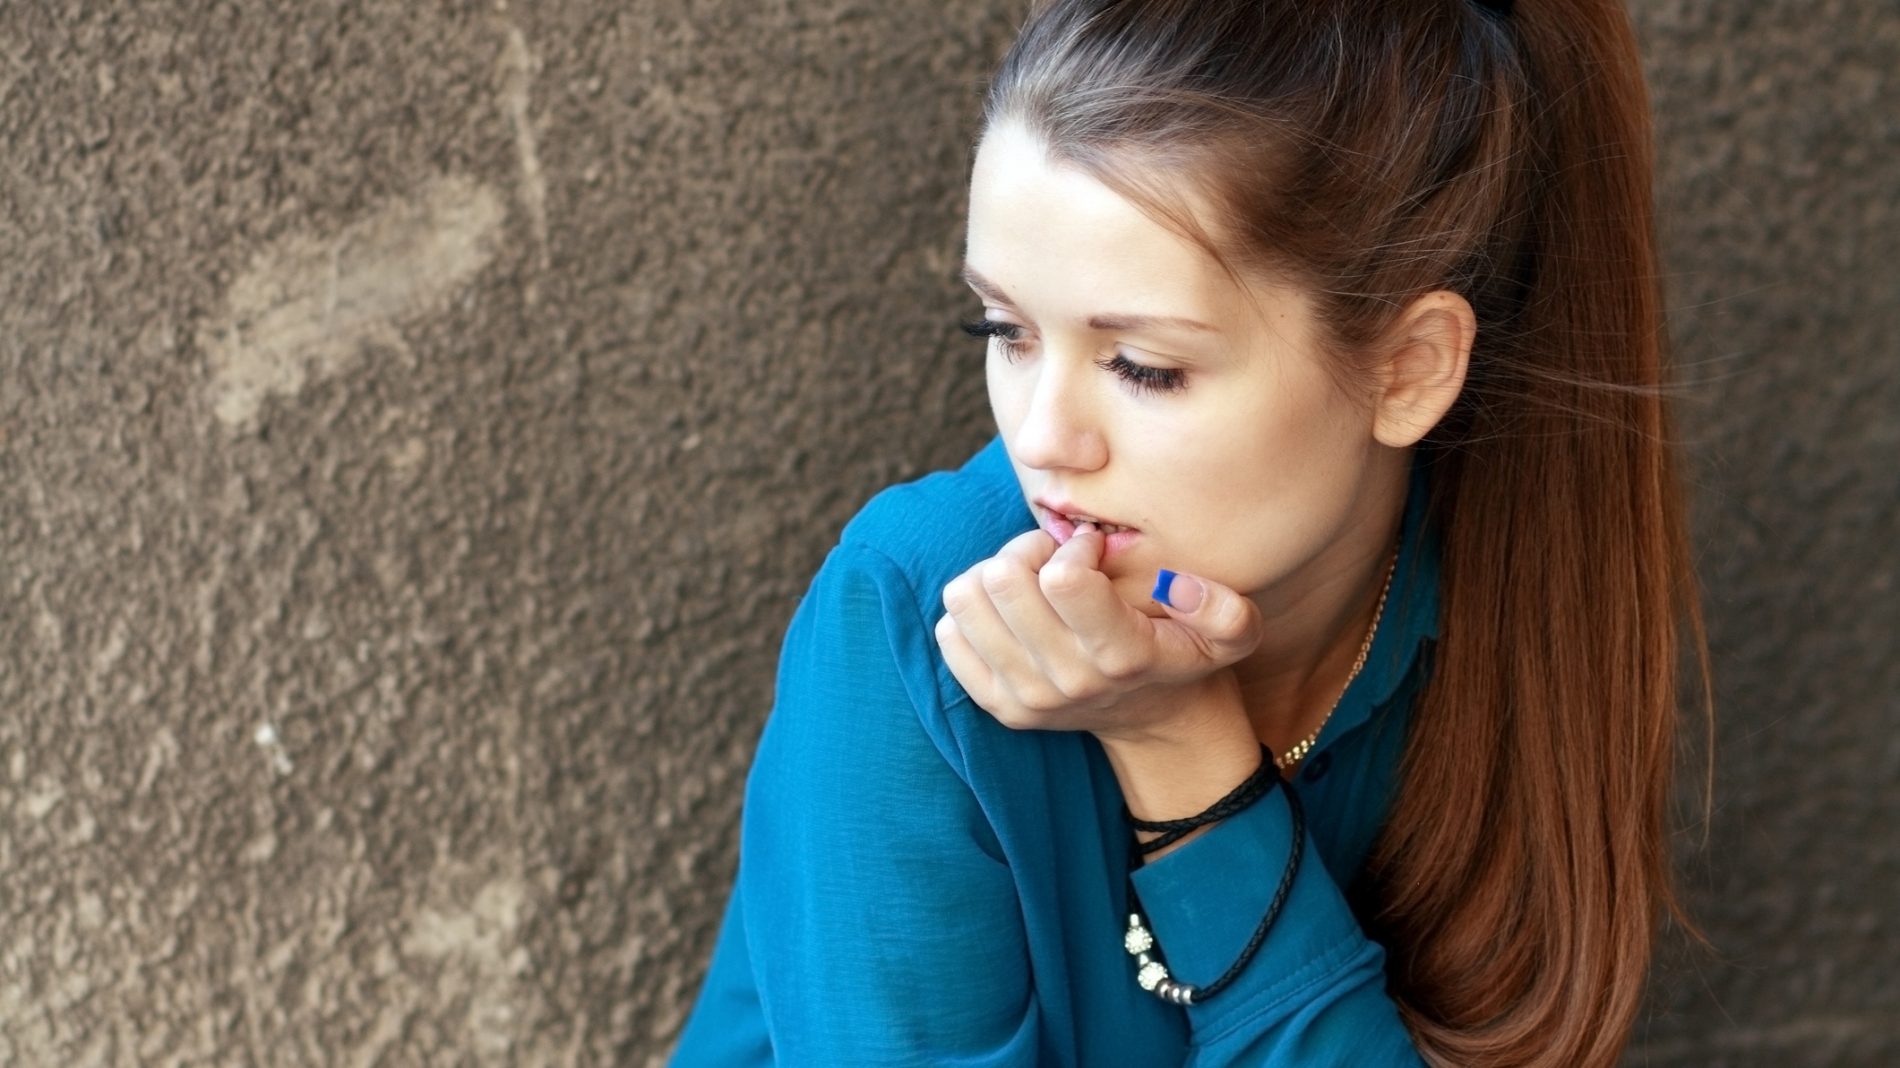 A girl in a blue shirt sitting against a concrete wall